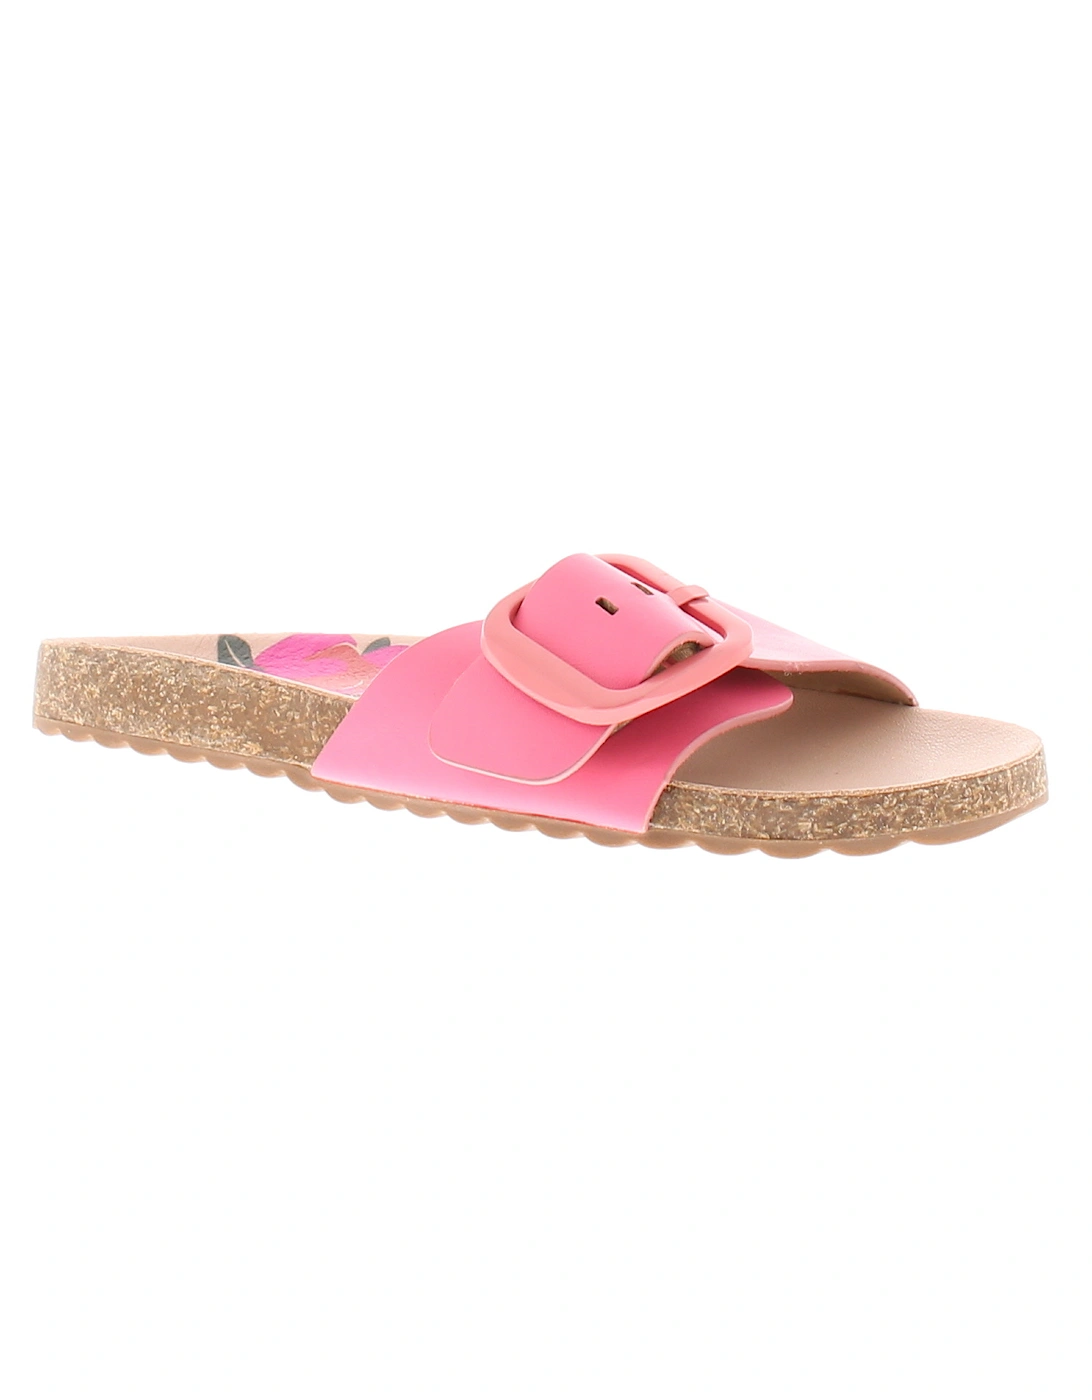 Womens Flat Sandals Mules Bloom Slip On pink UK Size, 6 of 5